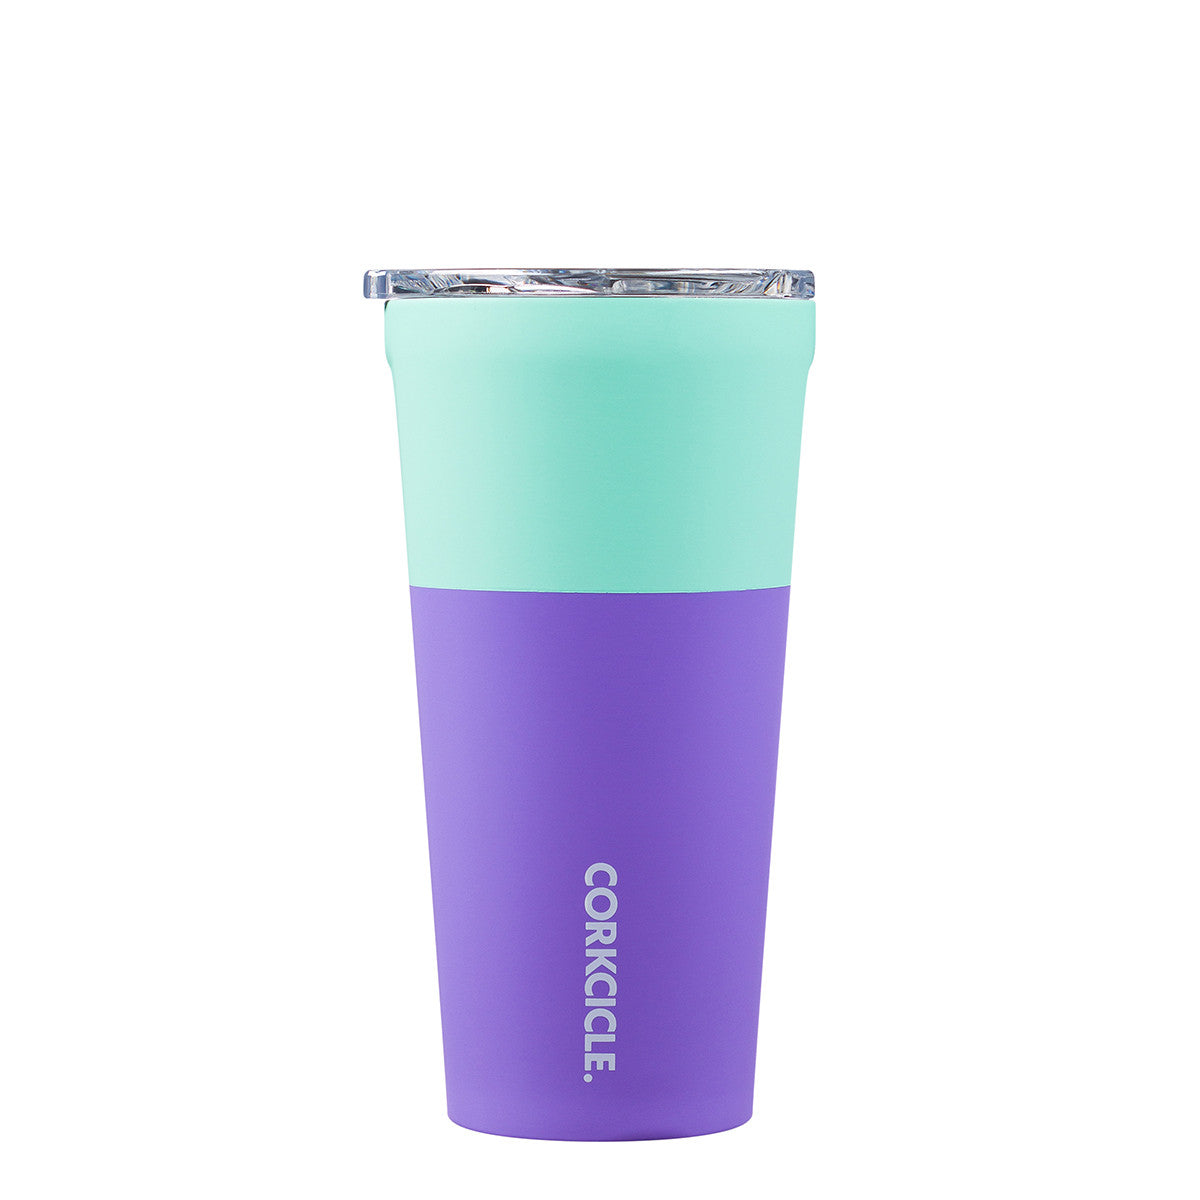 Corkcicle Colour Block Tumbler 475ml - Mint Berry Insulated Stainless Steel Cup